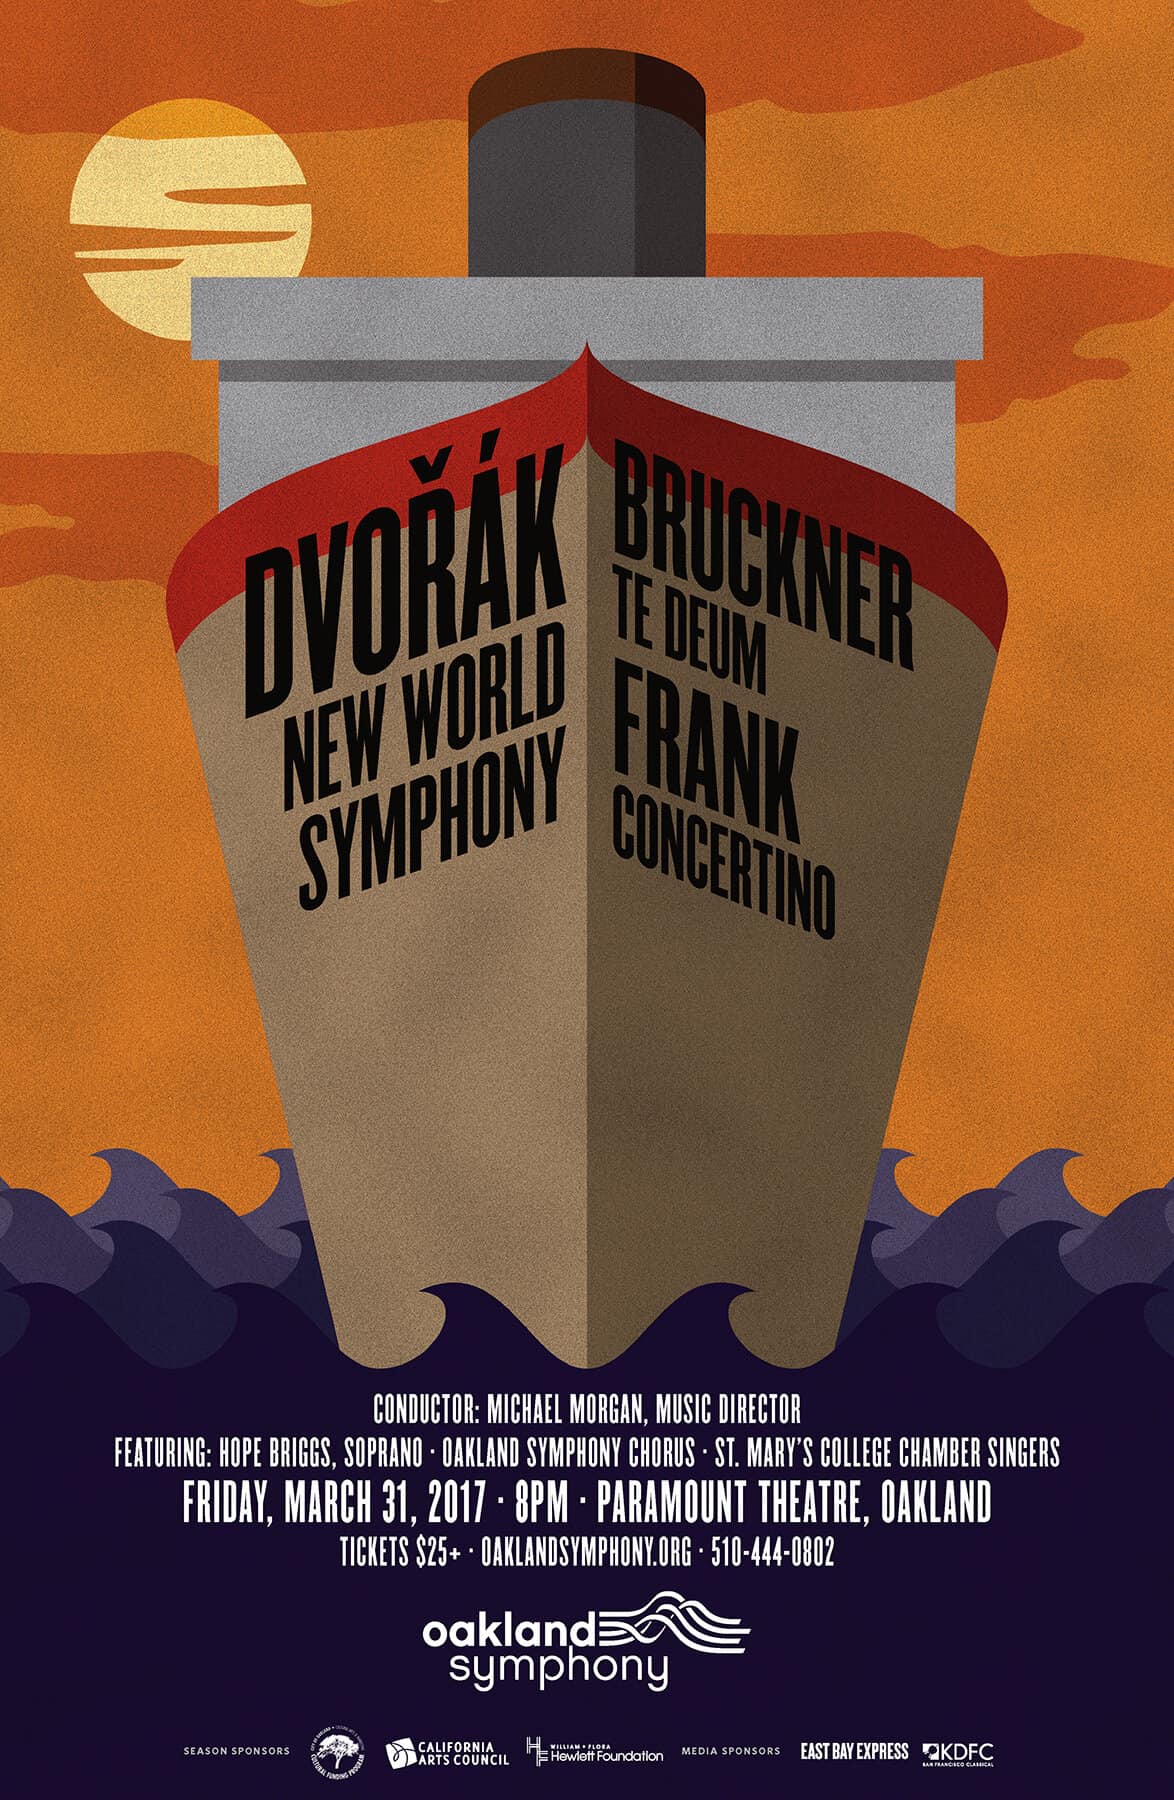 Poster for Oakland Symphony for a program featuring Dvořák's "New World Symphony." The image is evocative of a classic early 20th century travel poster for an ocean liner with the composers and titles on the bow of the ship.